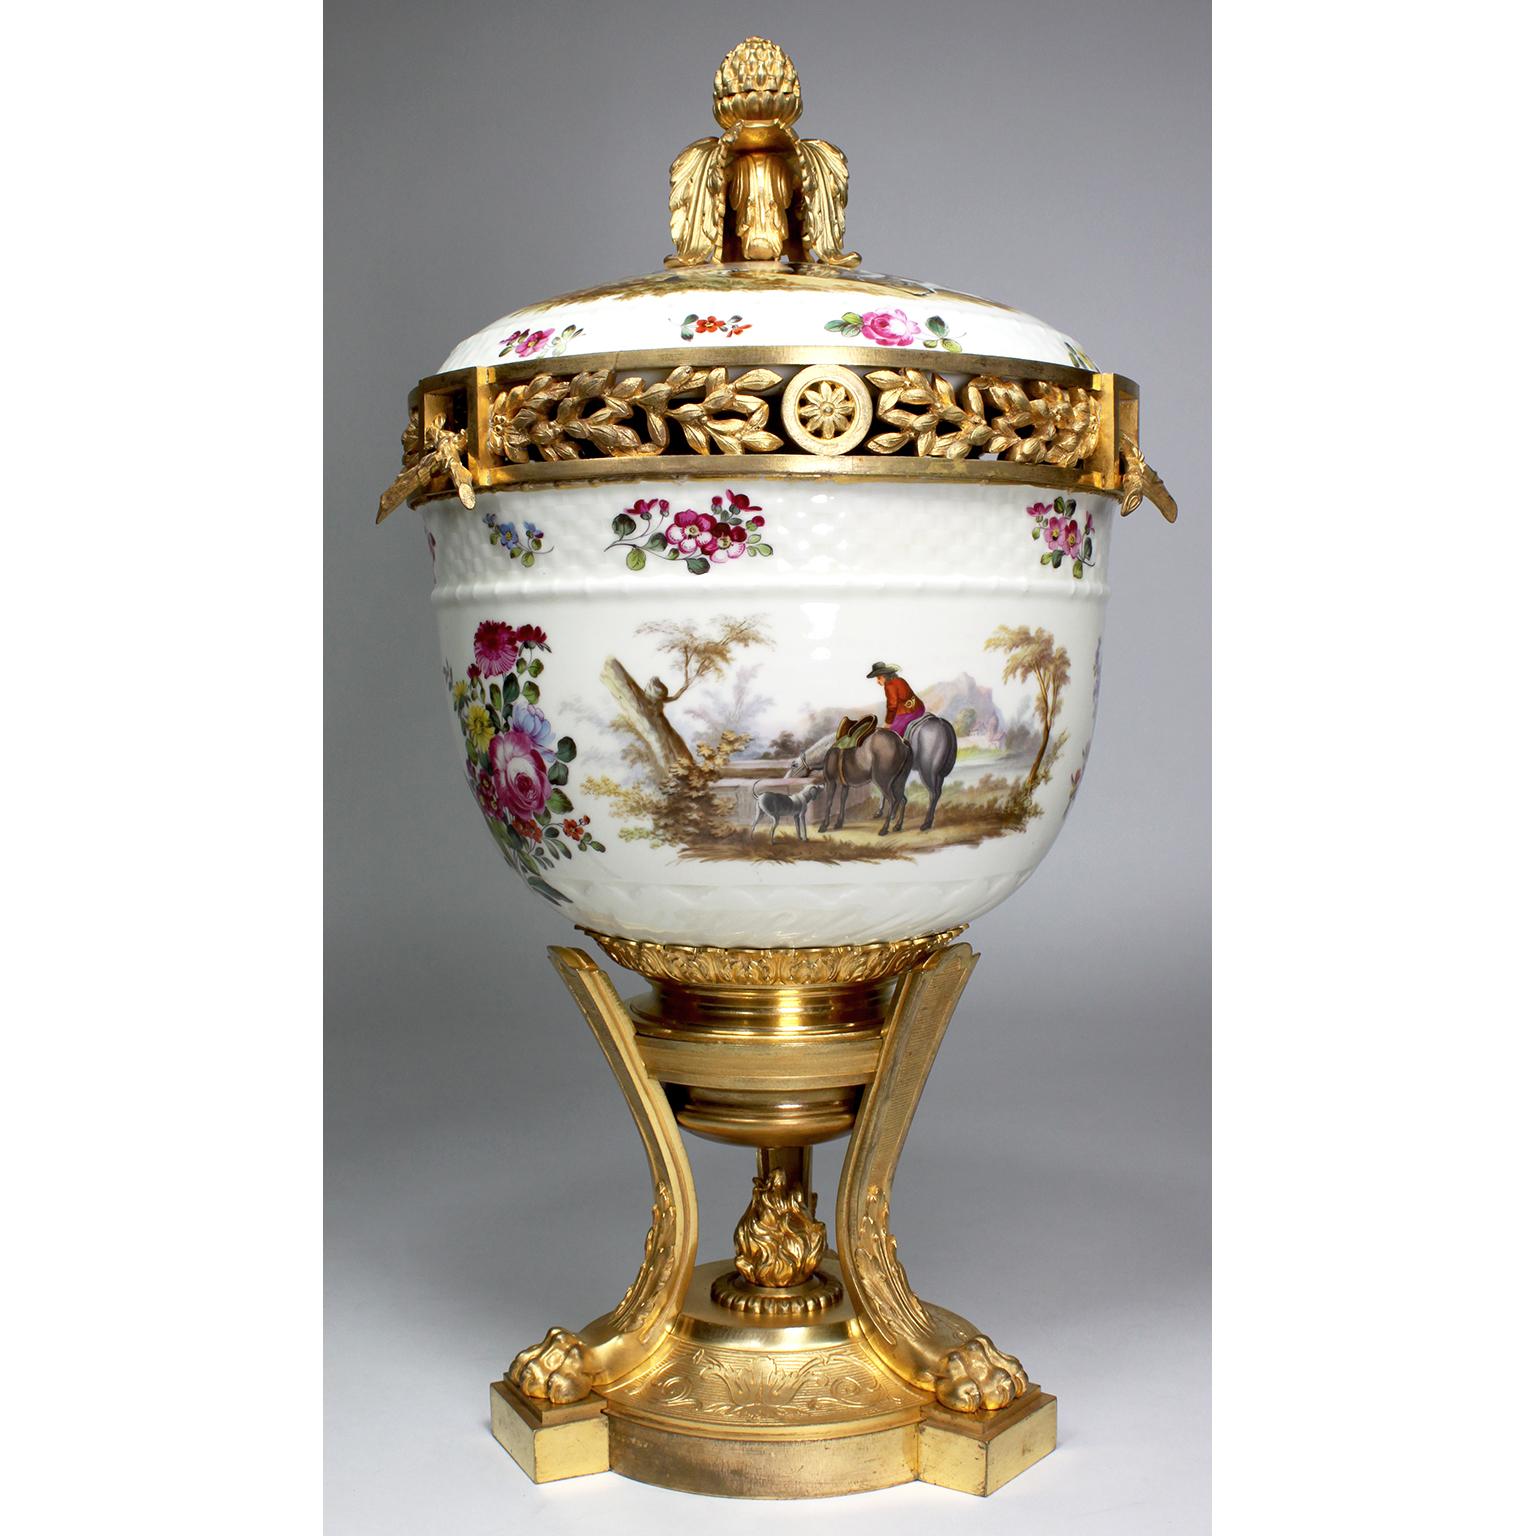 A very fine German 19th century porcelain and gilt-bronze mounted Potpourri Urn-Vase with Lid, attributed to Meissen. The ovoid white porcelain urn, decorated on all sides and lid with outdoor Country scenes of the hunting life, with peasants,